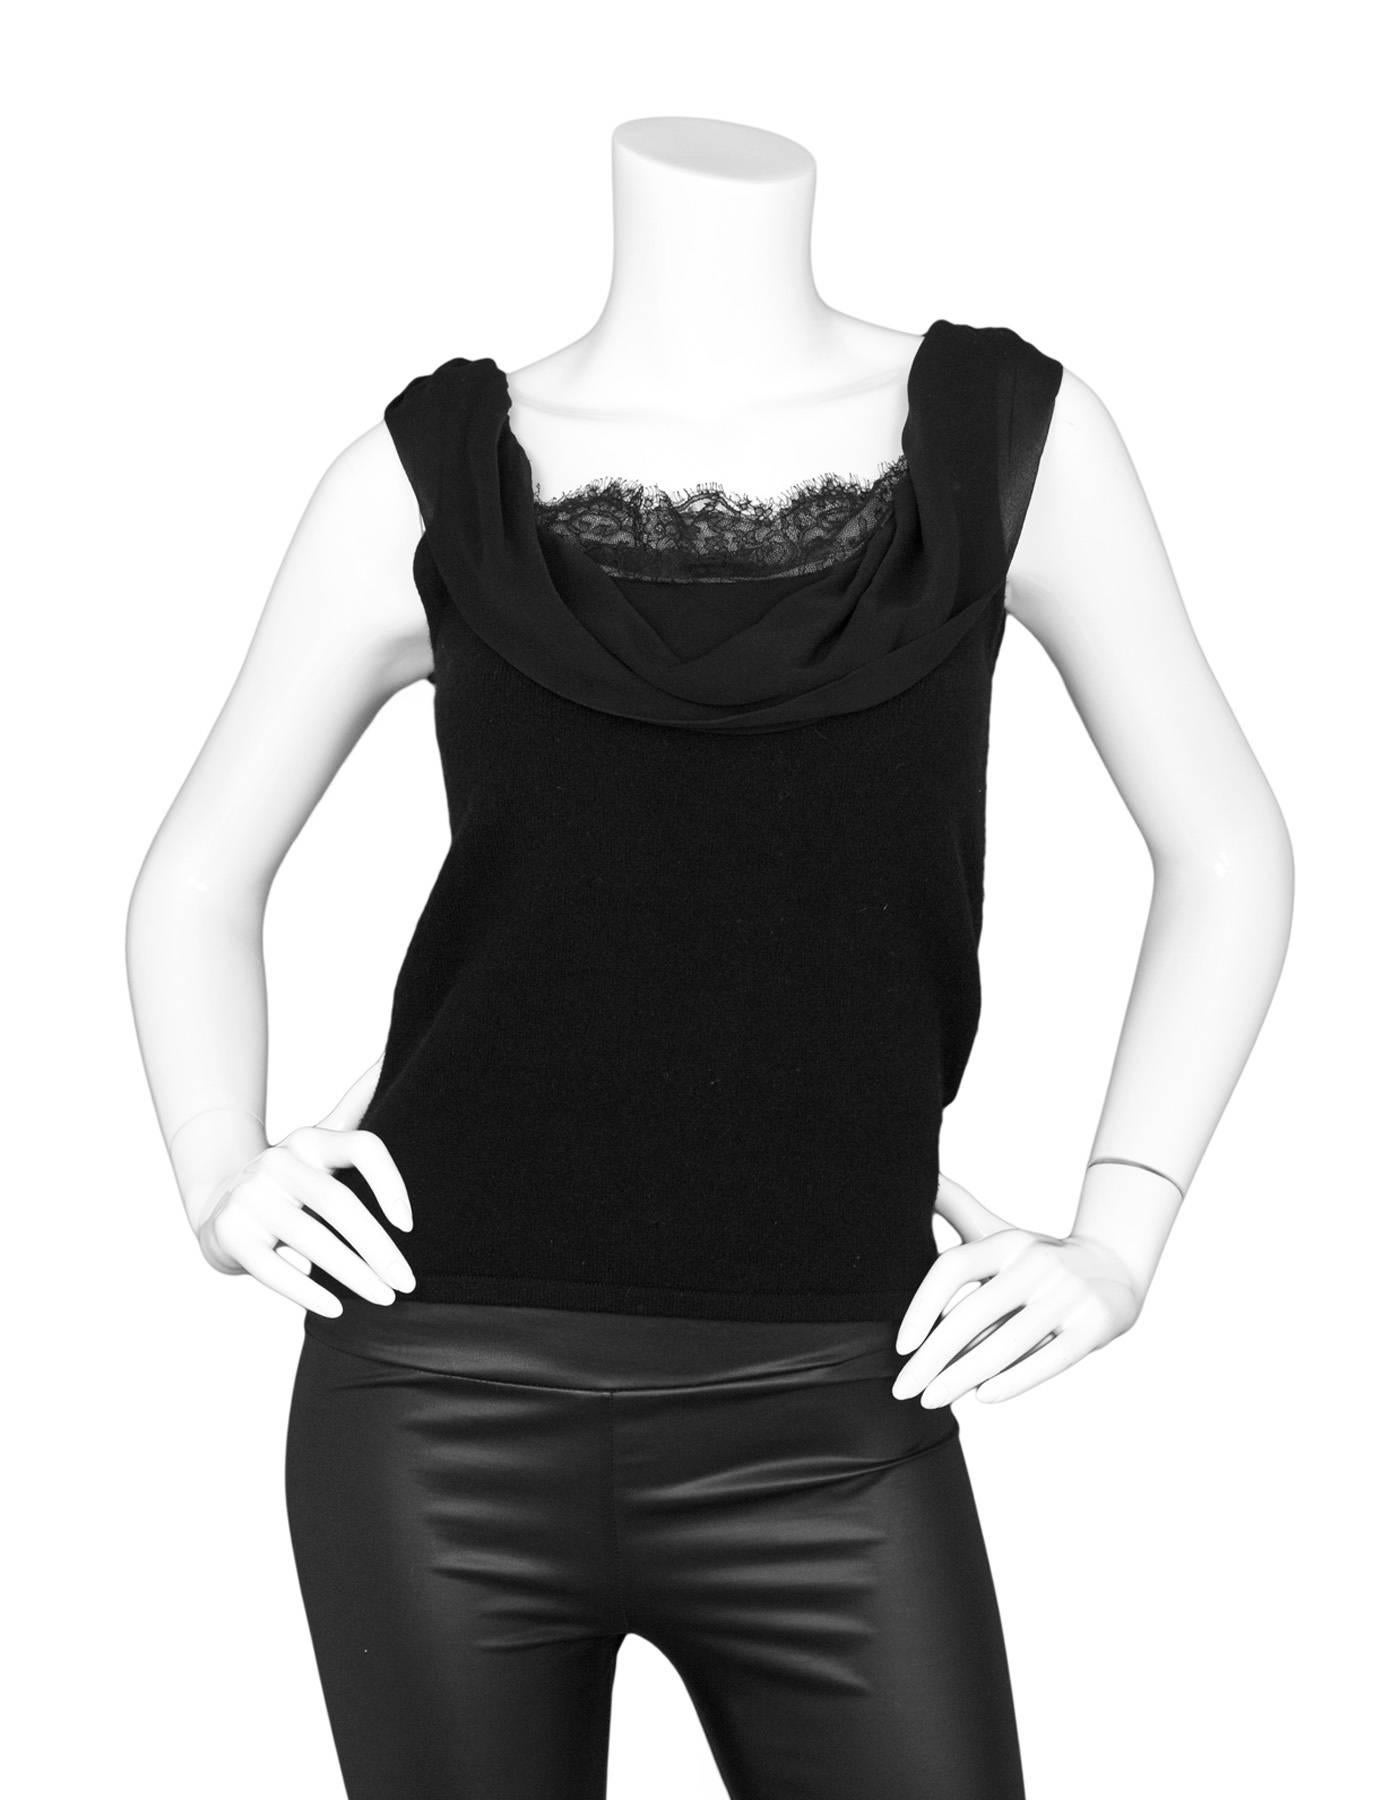 Ralph Lauren Black Cashmere Sleeveless Top
Features black silk and lace details at neckline

Made In: China
Color: Black
Composition: 88% cashmere, 11% nylon, 1% elastane
Lining: None
Closure/Opening: Pull over
Exterior Pockets: None
Interior